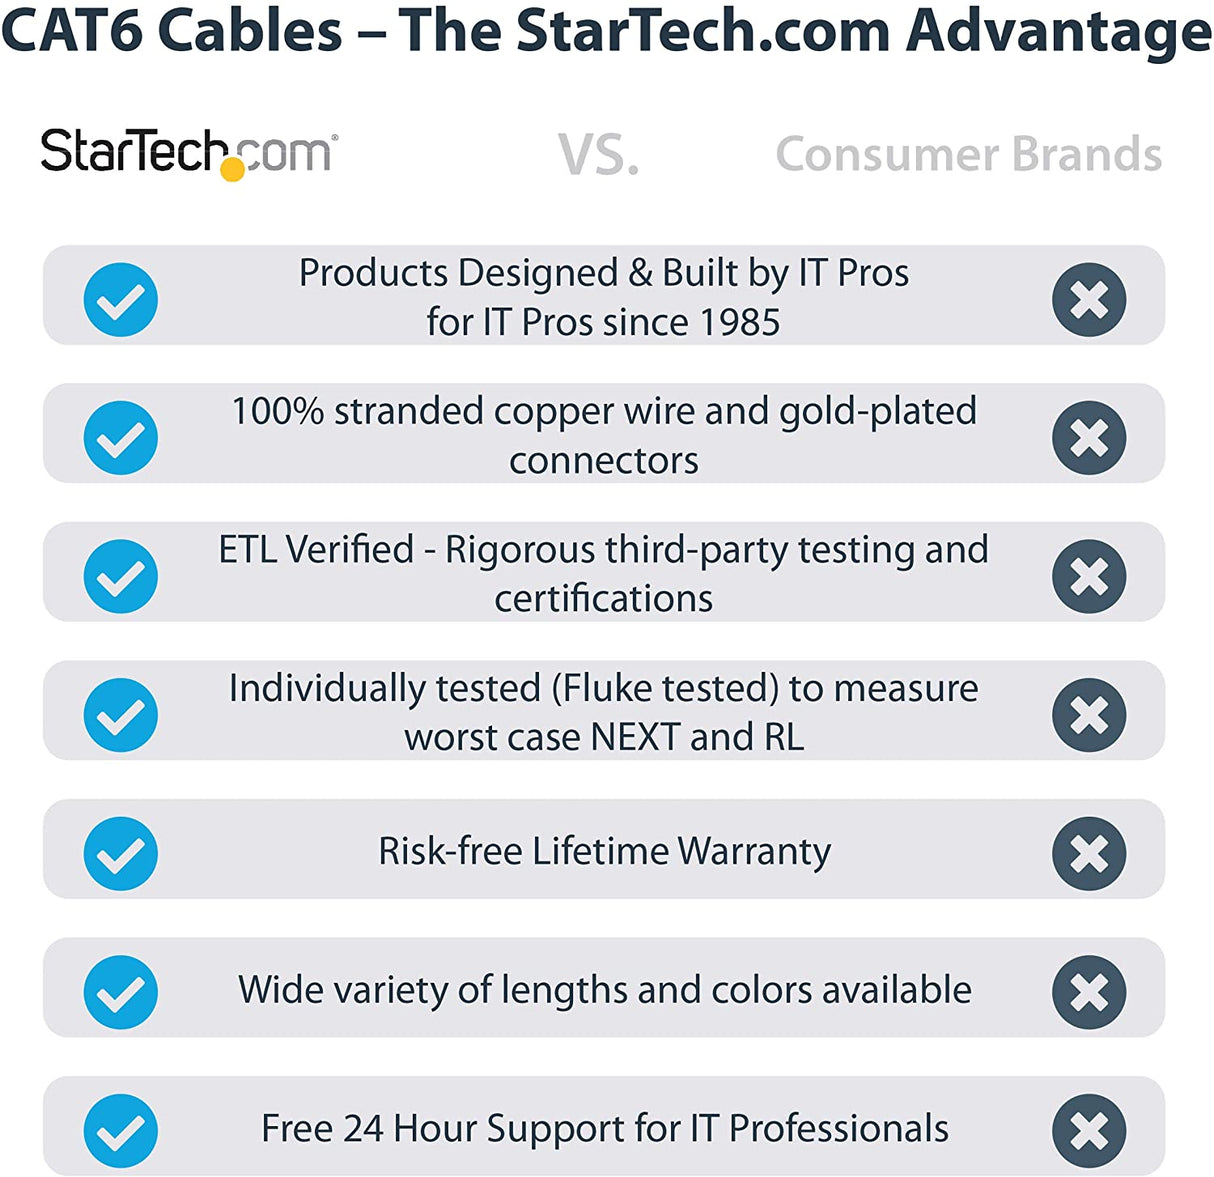 StarTech.com 25ft CAT6 Ethernet Cable - Gray CAT 6 Gigabit Ethernet Wire -650MHz 100W PoE++ RJ45 UTP Molded Category 6 Network/Patch Cord w/Strain Relief/Fluke Tested UL/TIA Certified (C6PATCH25GR) Gray 25 ft / 7.6 m 1 Pack